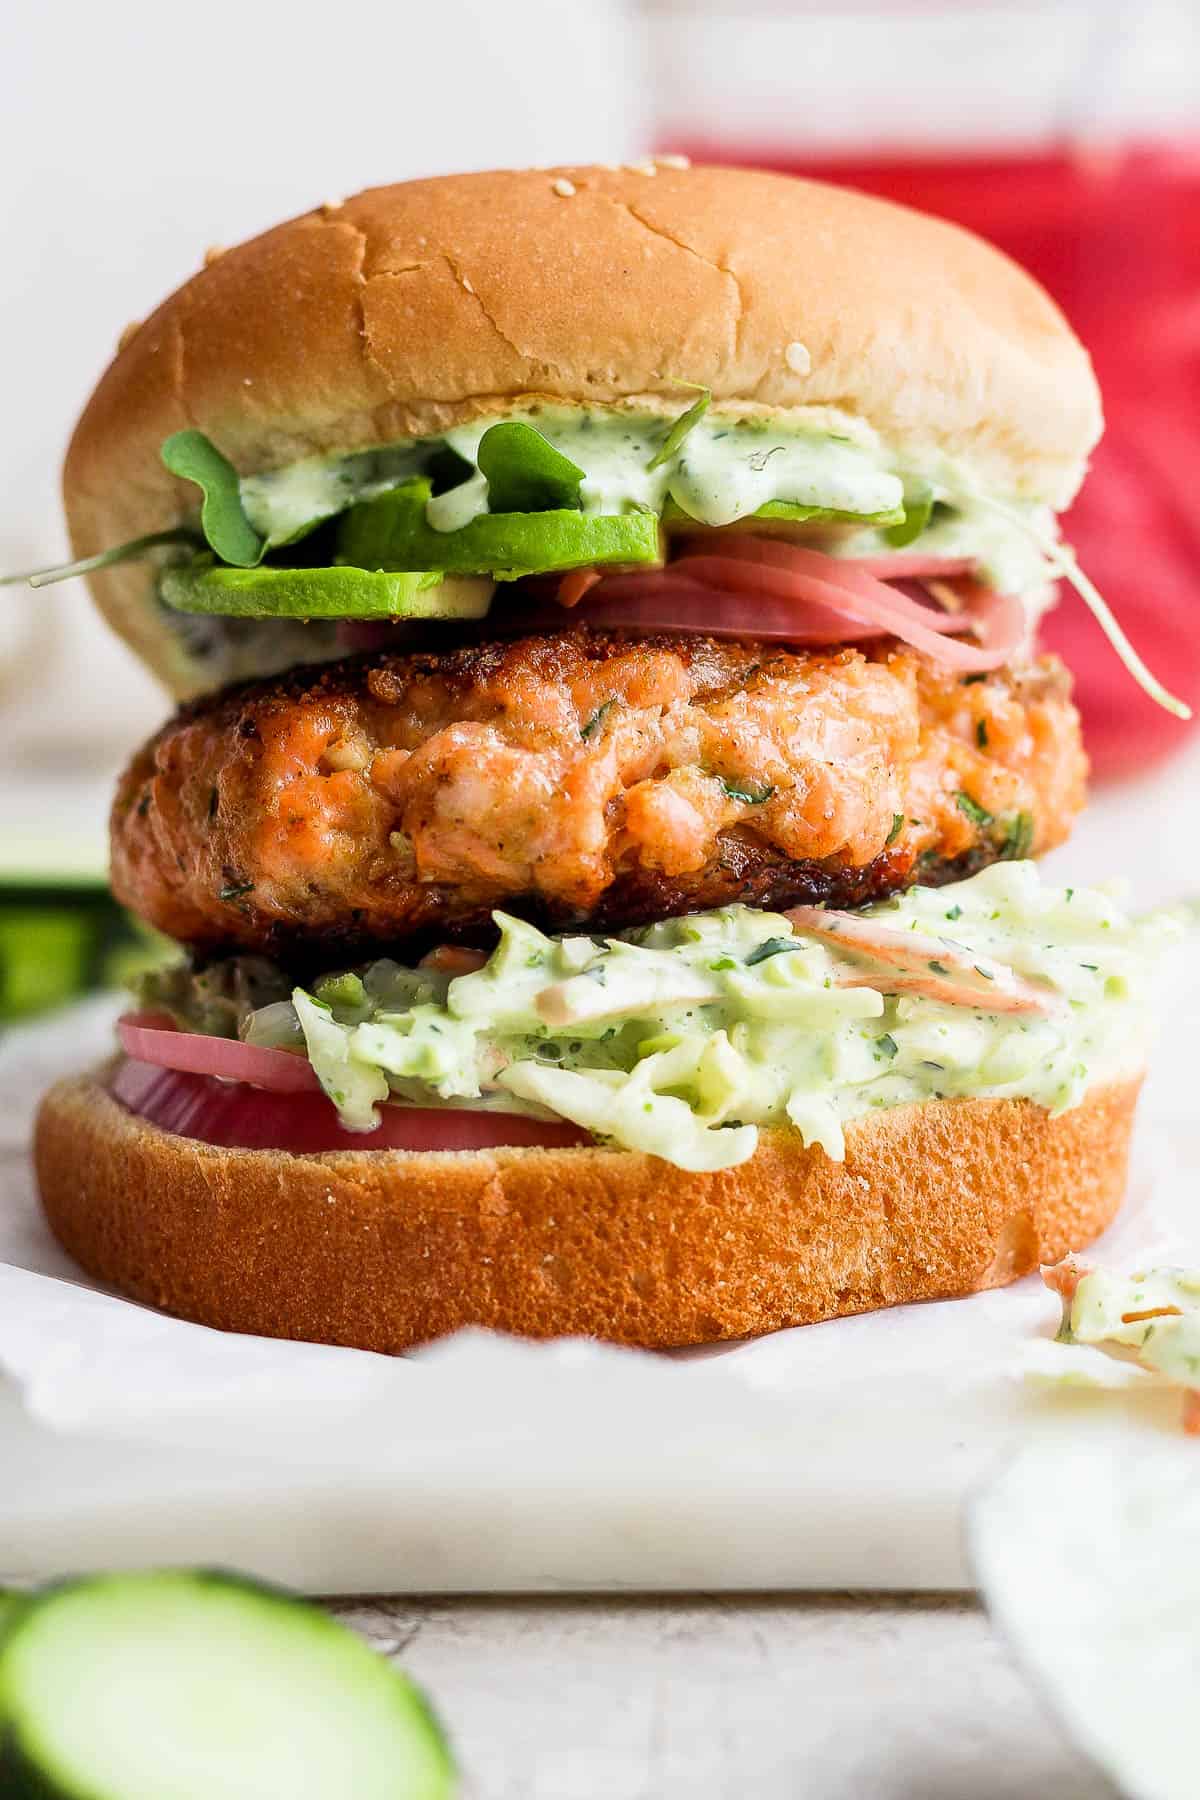 A fully topped salmon burger.